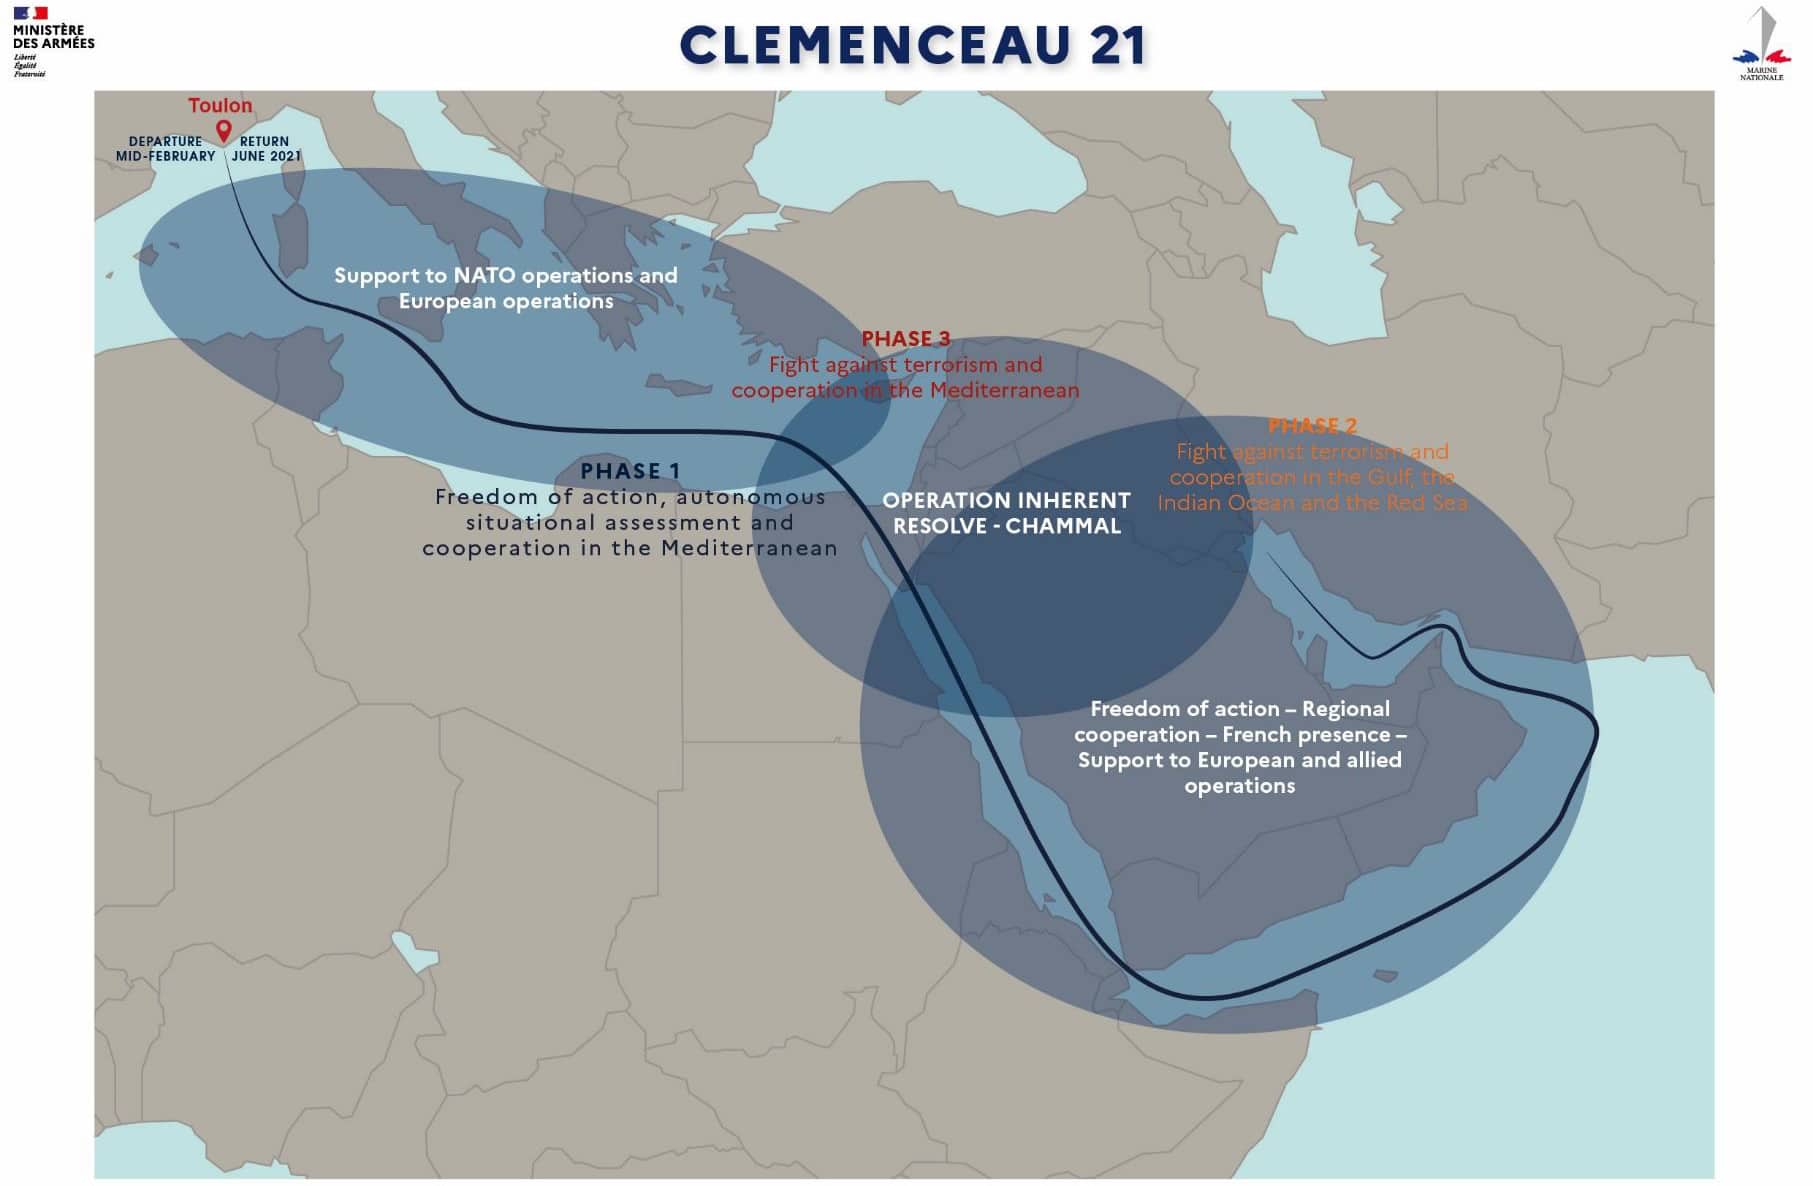 Clemenceau-21-French-CSG.jpg